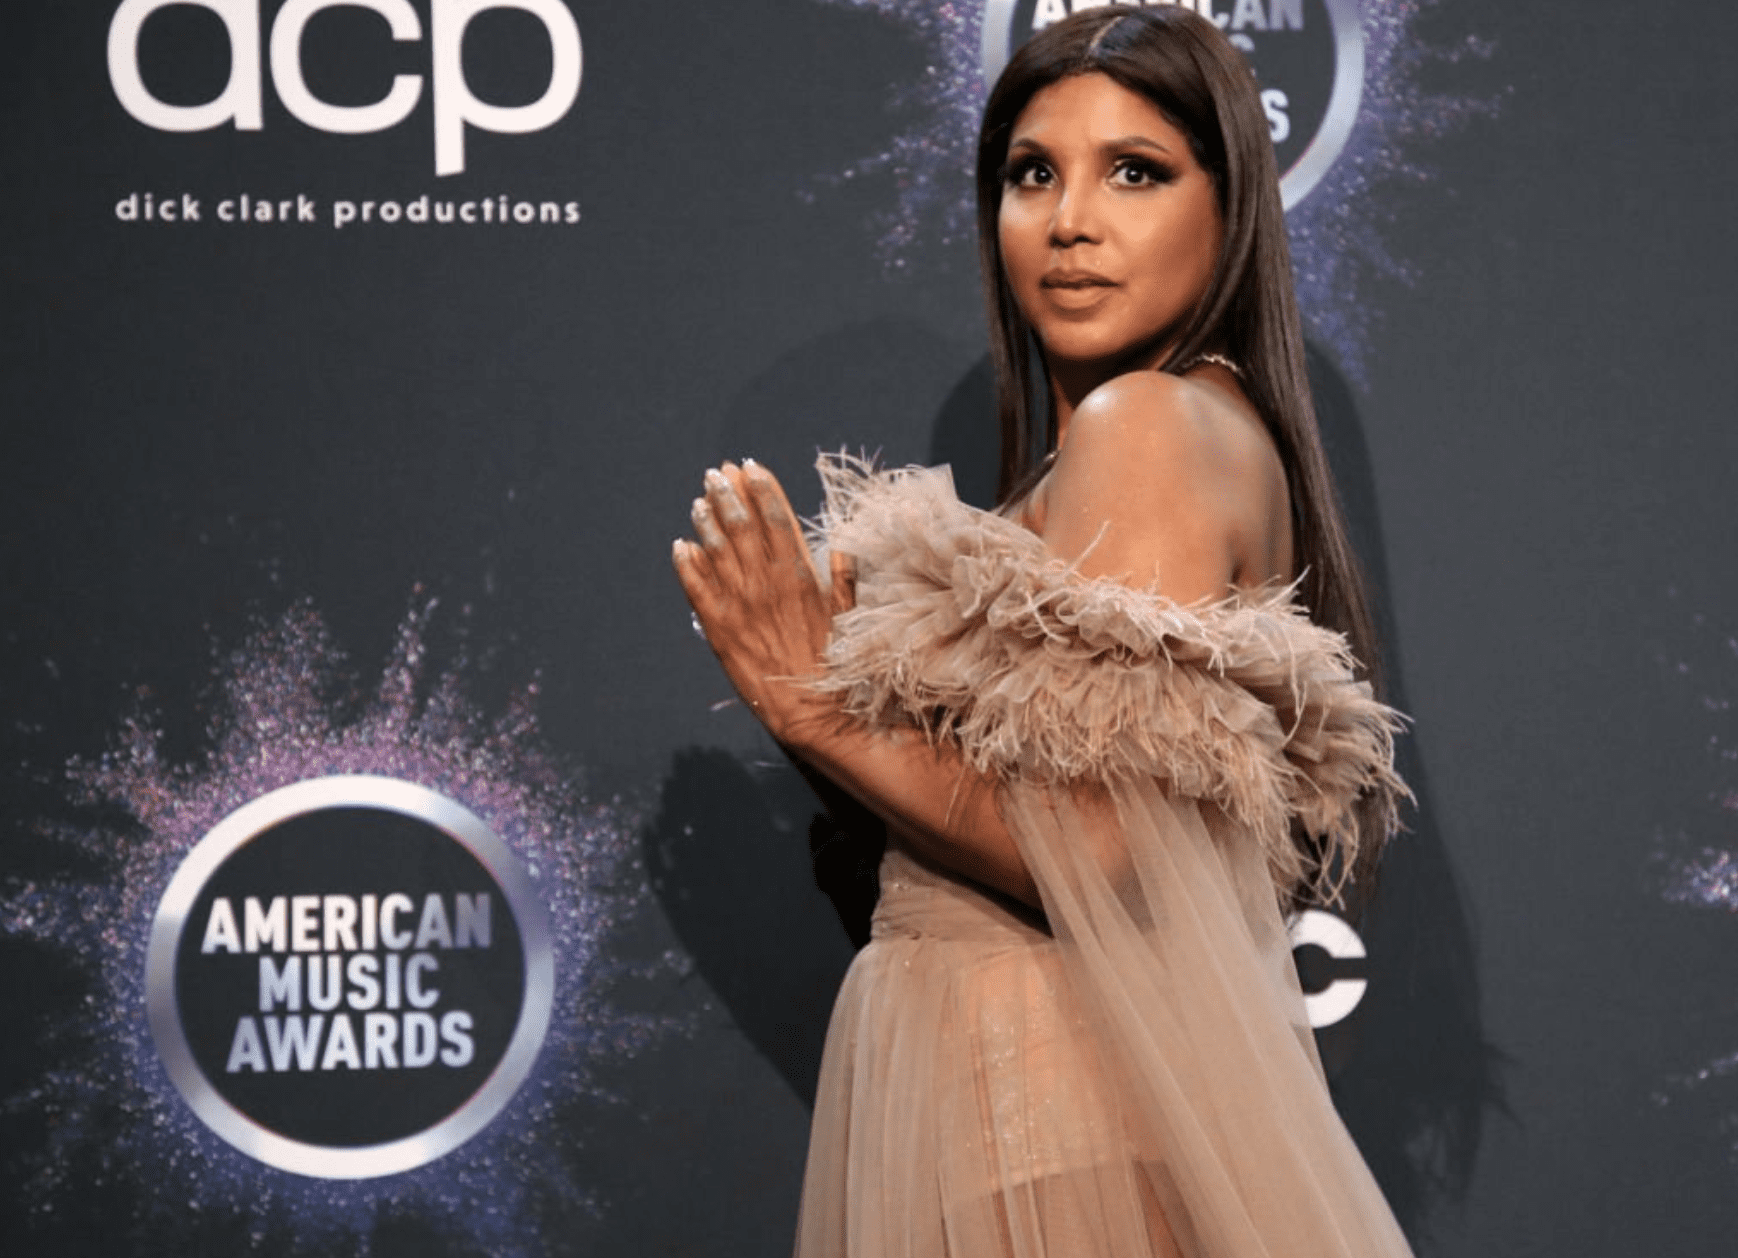 Toni Braxton at the 2019 American Music Awards at Microsoft Theater on November 24, 2019 in Los Angeles, California. | Source: Getty Images